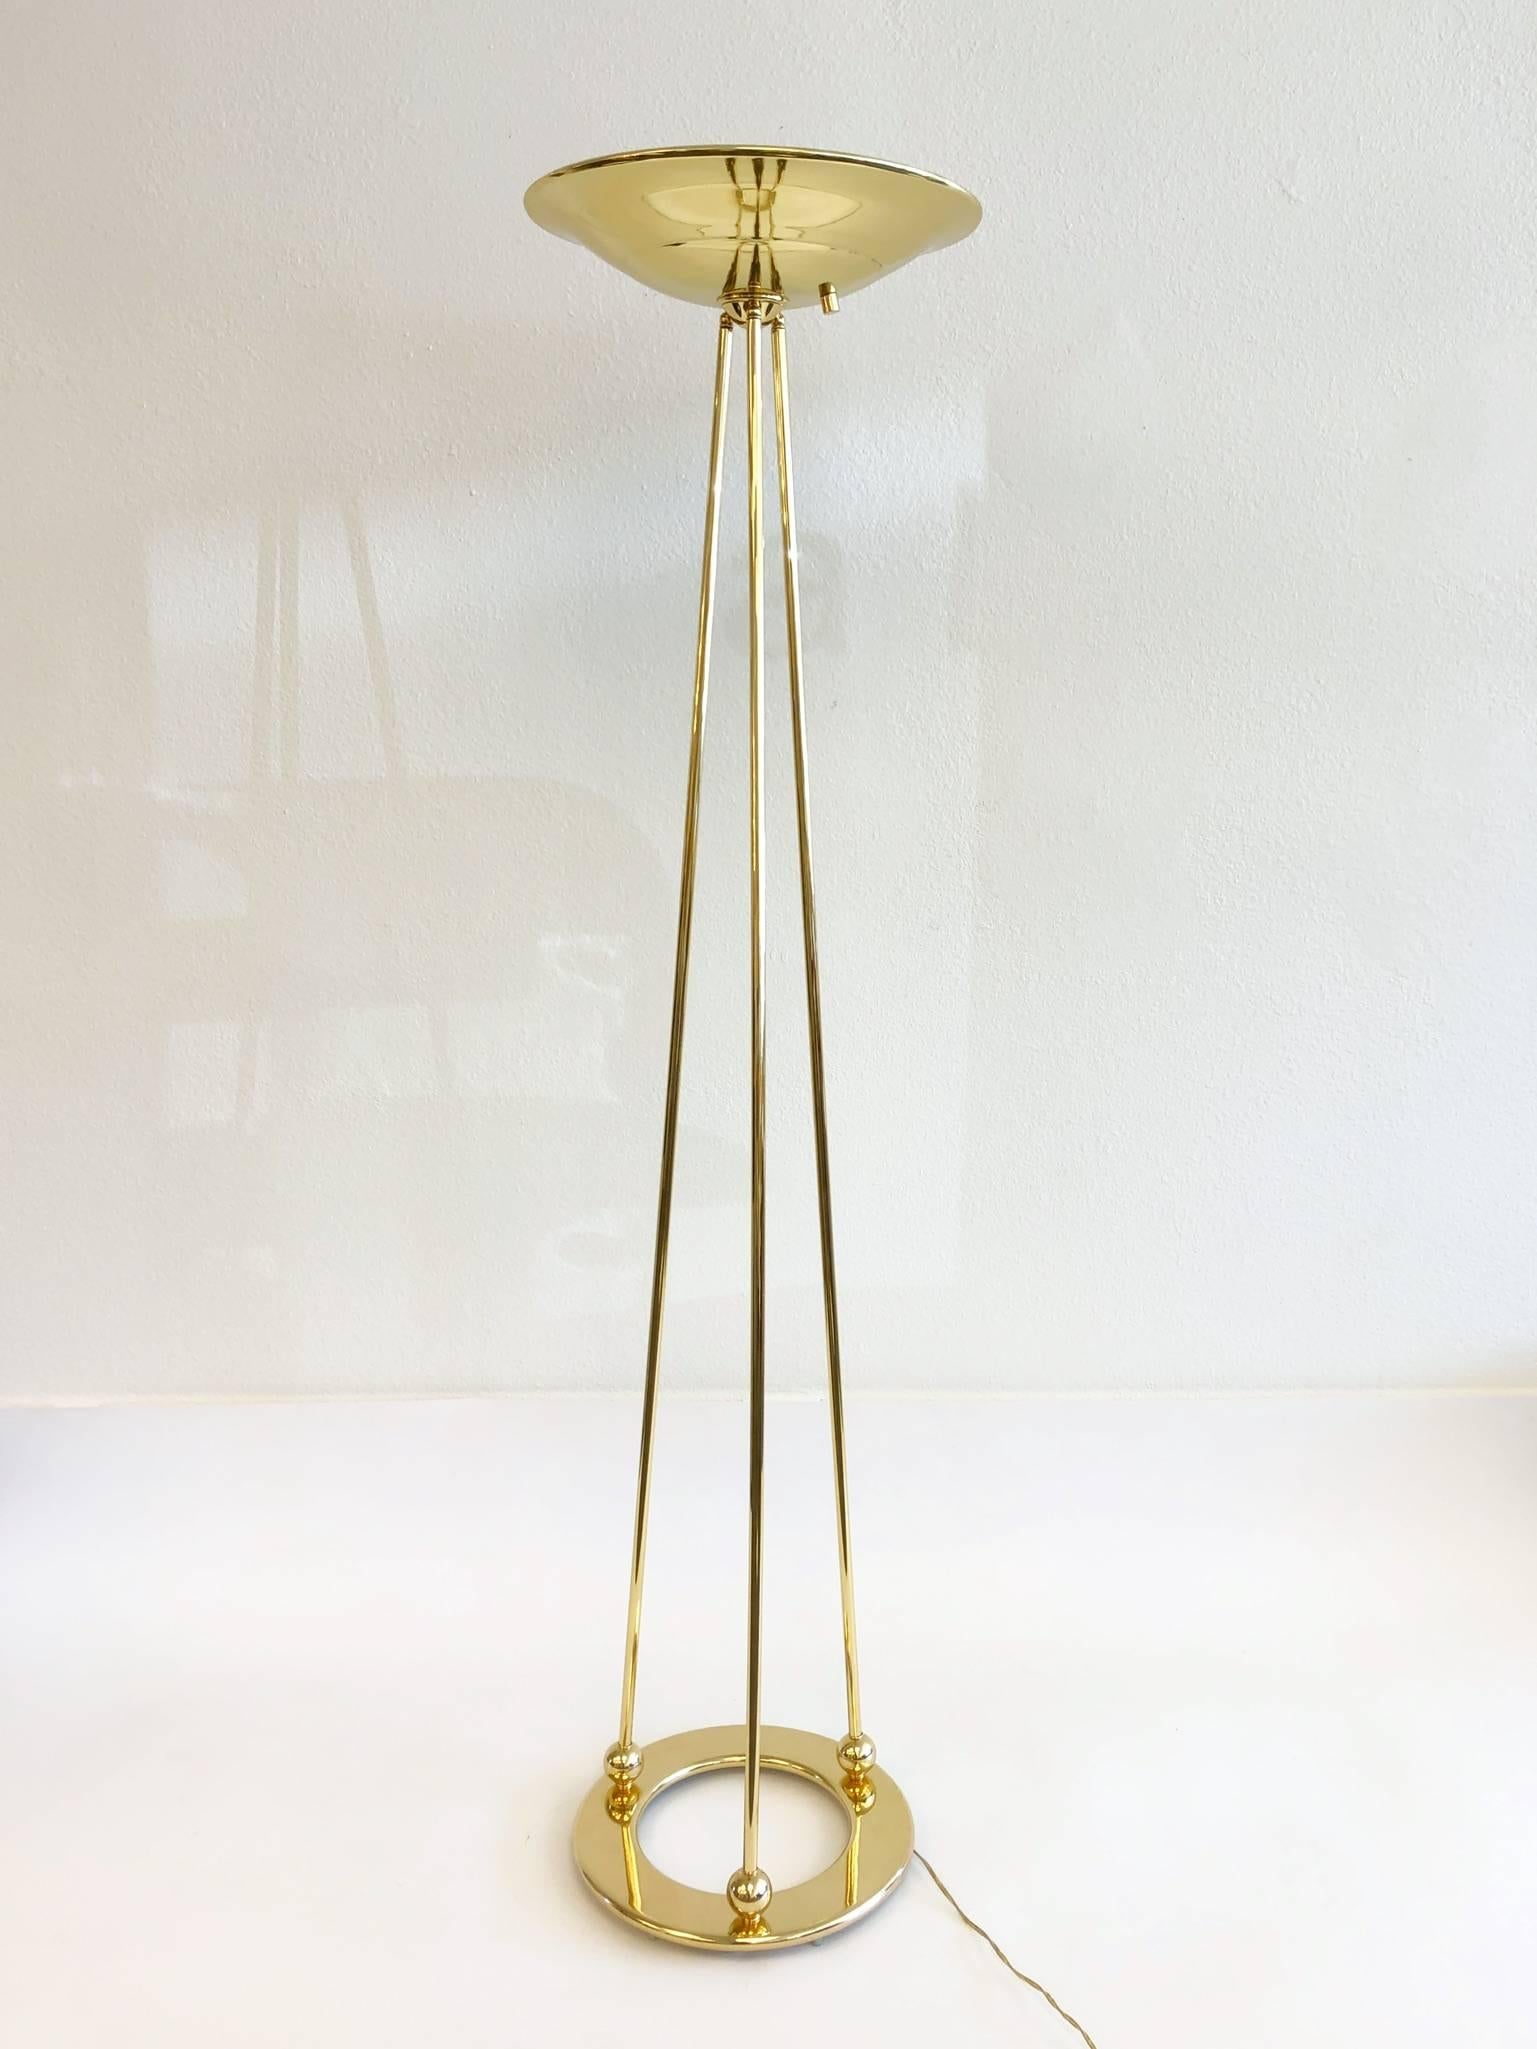 Pair of Polish Brass Torchiere Floor Lamps by Casella For Sale 2